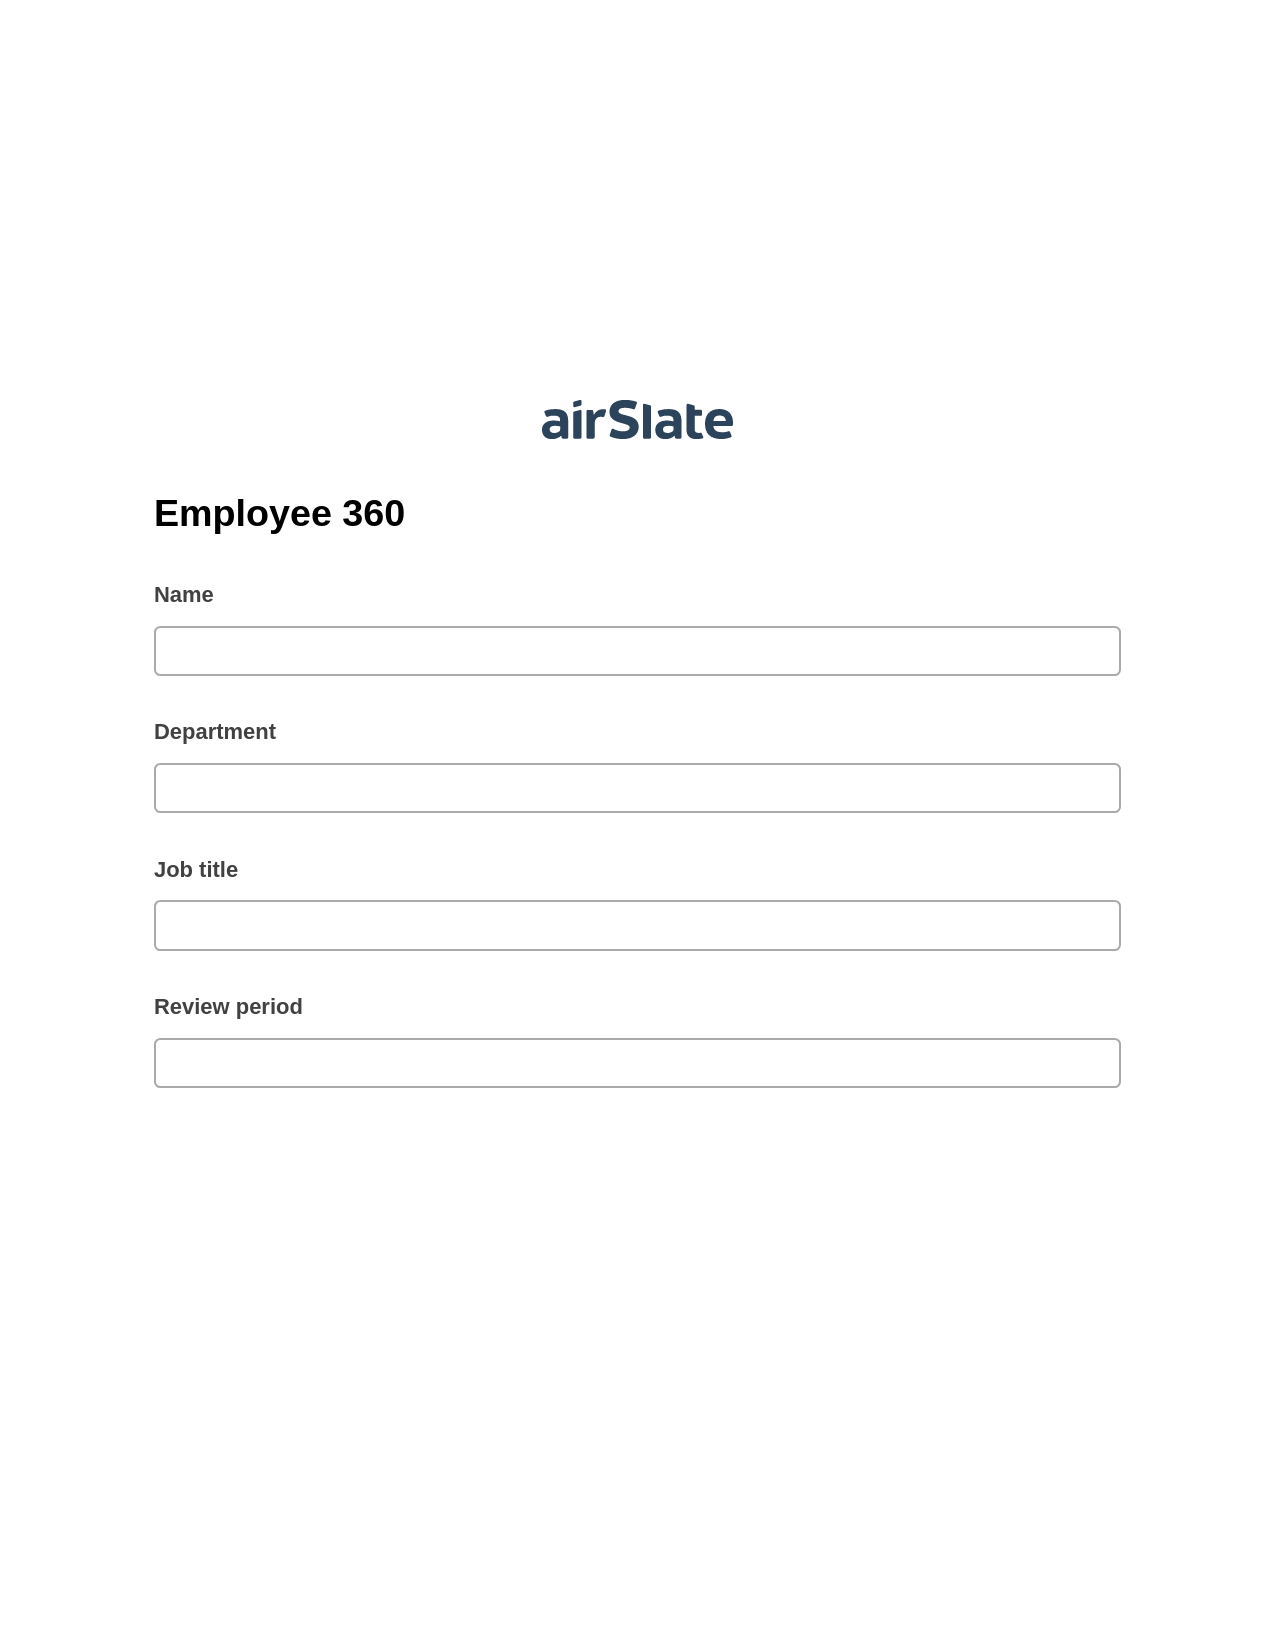 Employee 360 Pre-fill from CSV File Bot, Roles Reminder Bot, Archive to OneDrive Bot